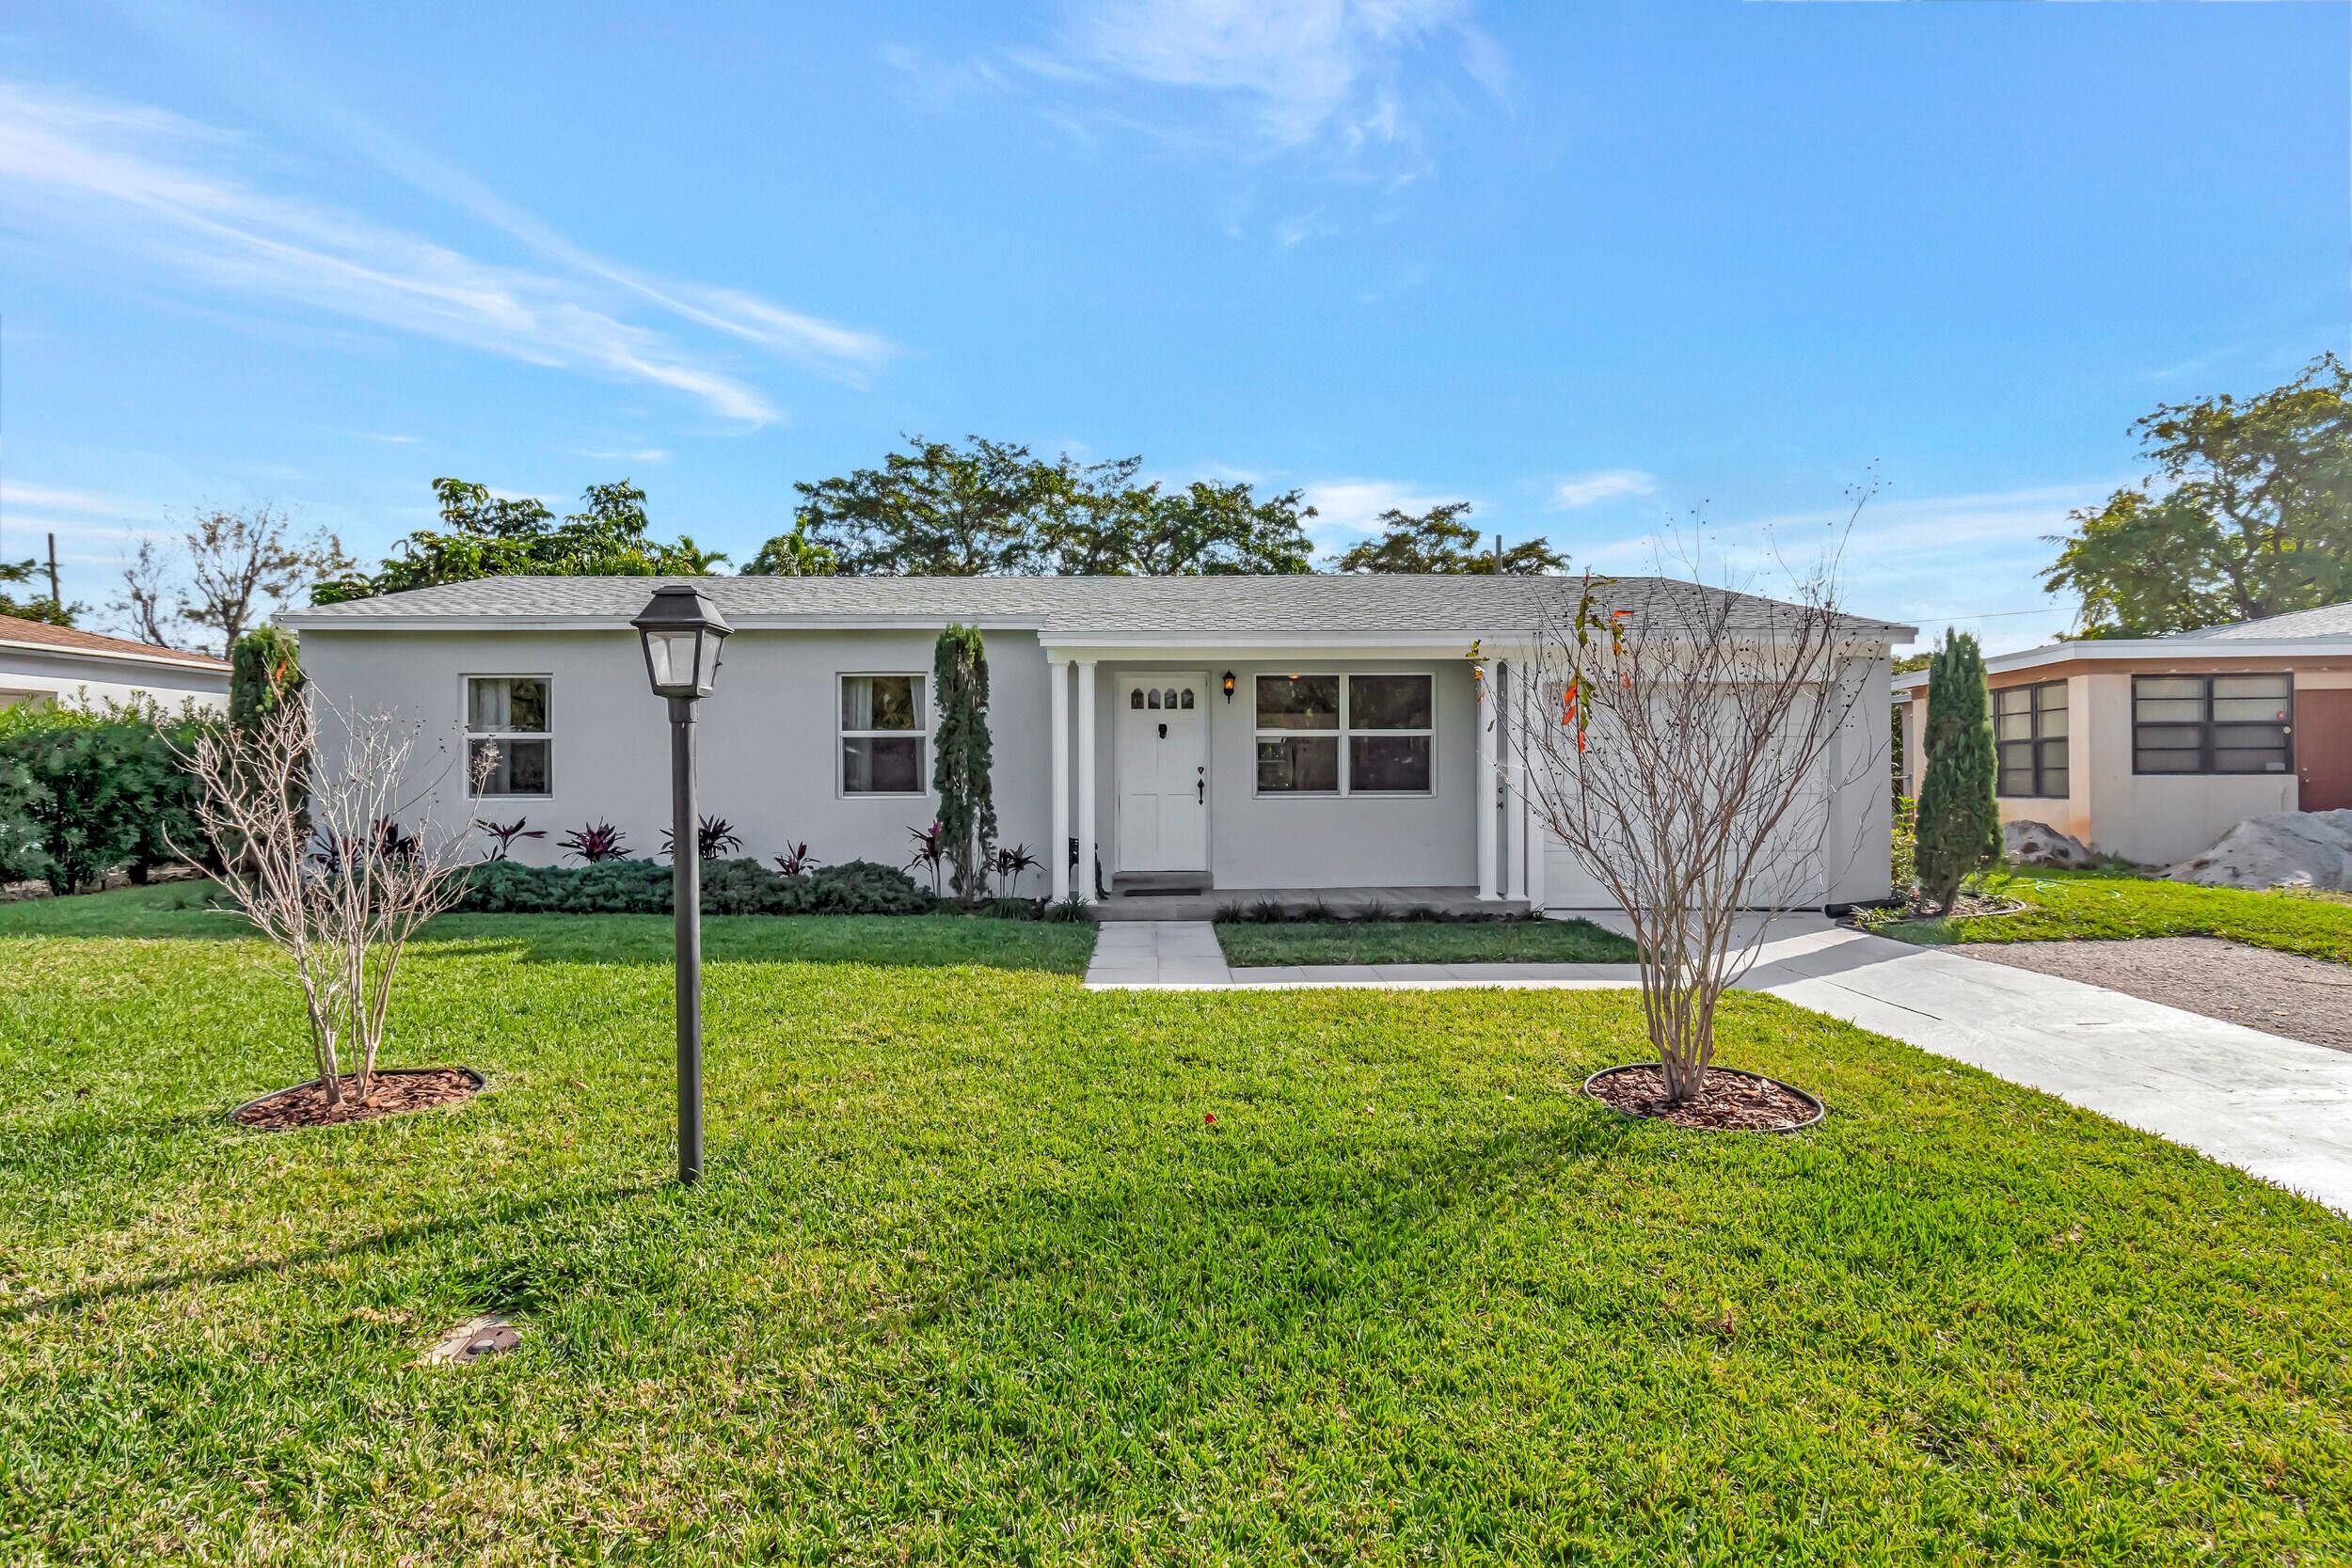 Nestled on a quiet block in Seacrest Park in the vibrant community of East Delray Beach, this charming home offers the perfect blend of coastal living and urban convenience.